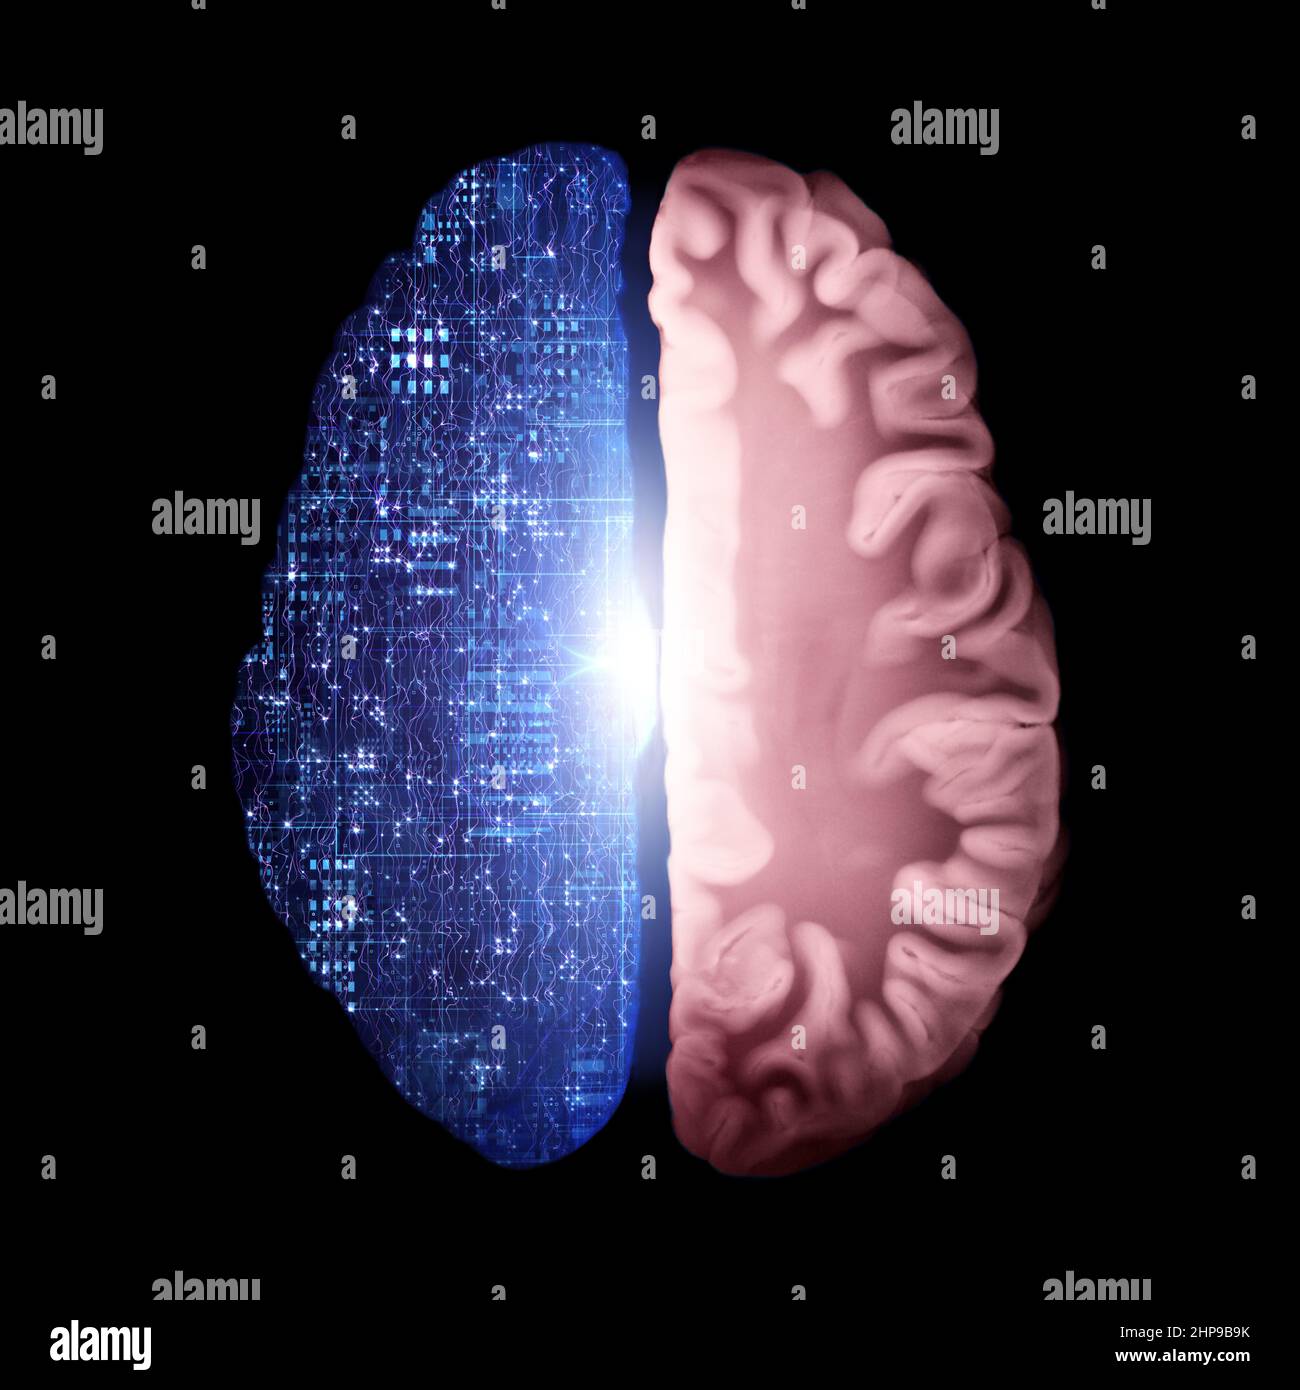 Brain Cross Section Connected To Central Processing Unit, Cyber Neural Networks, Neurolink, Artificial Intelligence, Cpu, Big Data, Internet Networks Stock Photo